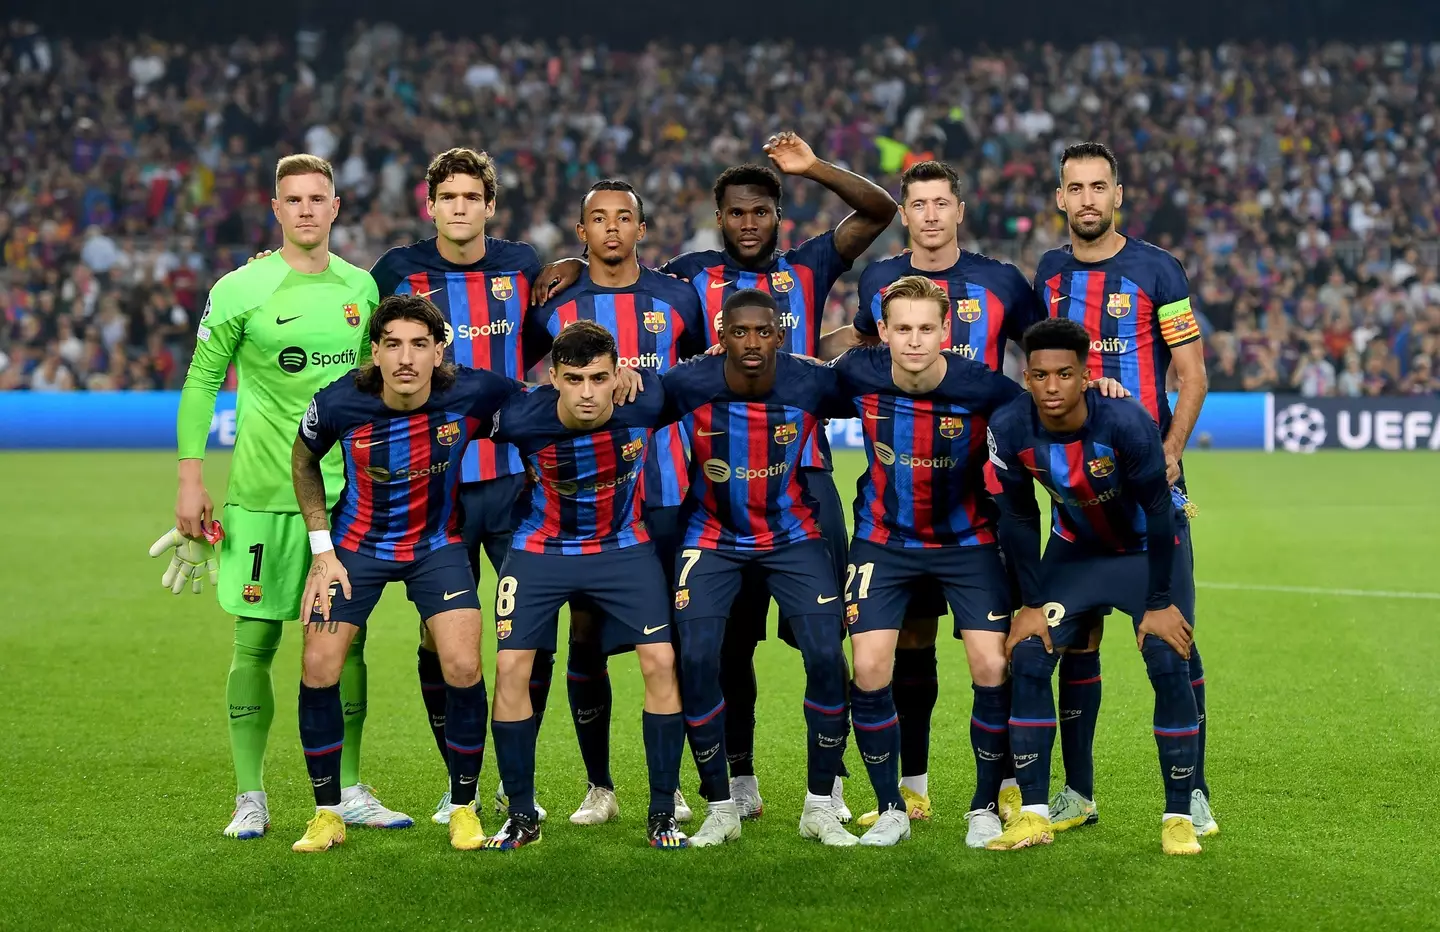 The Barcelona squad ahead of their game with Bayern Munich. (Image